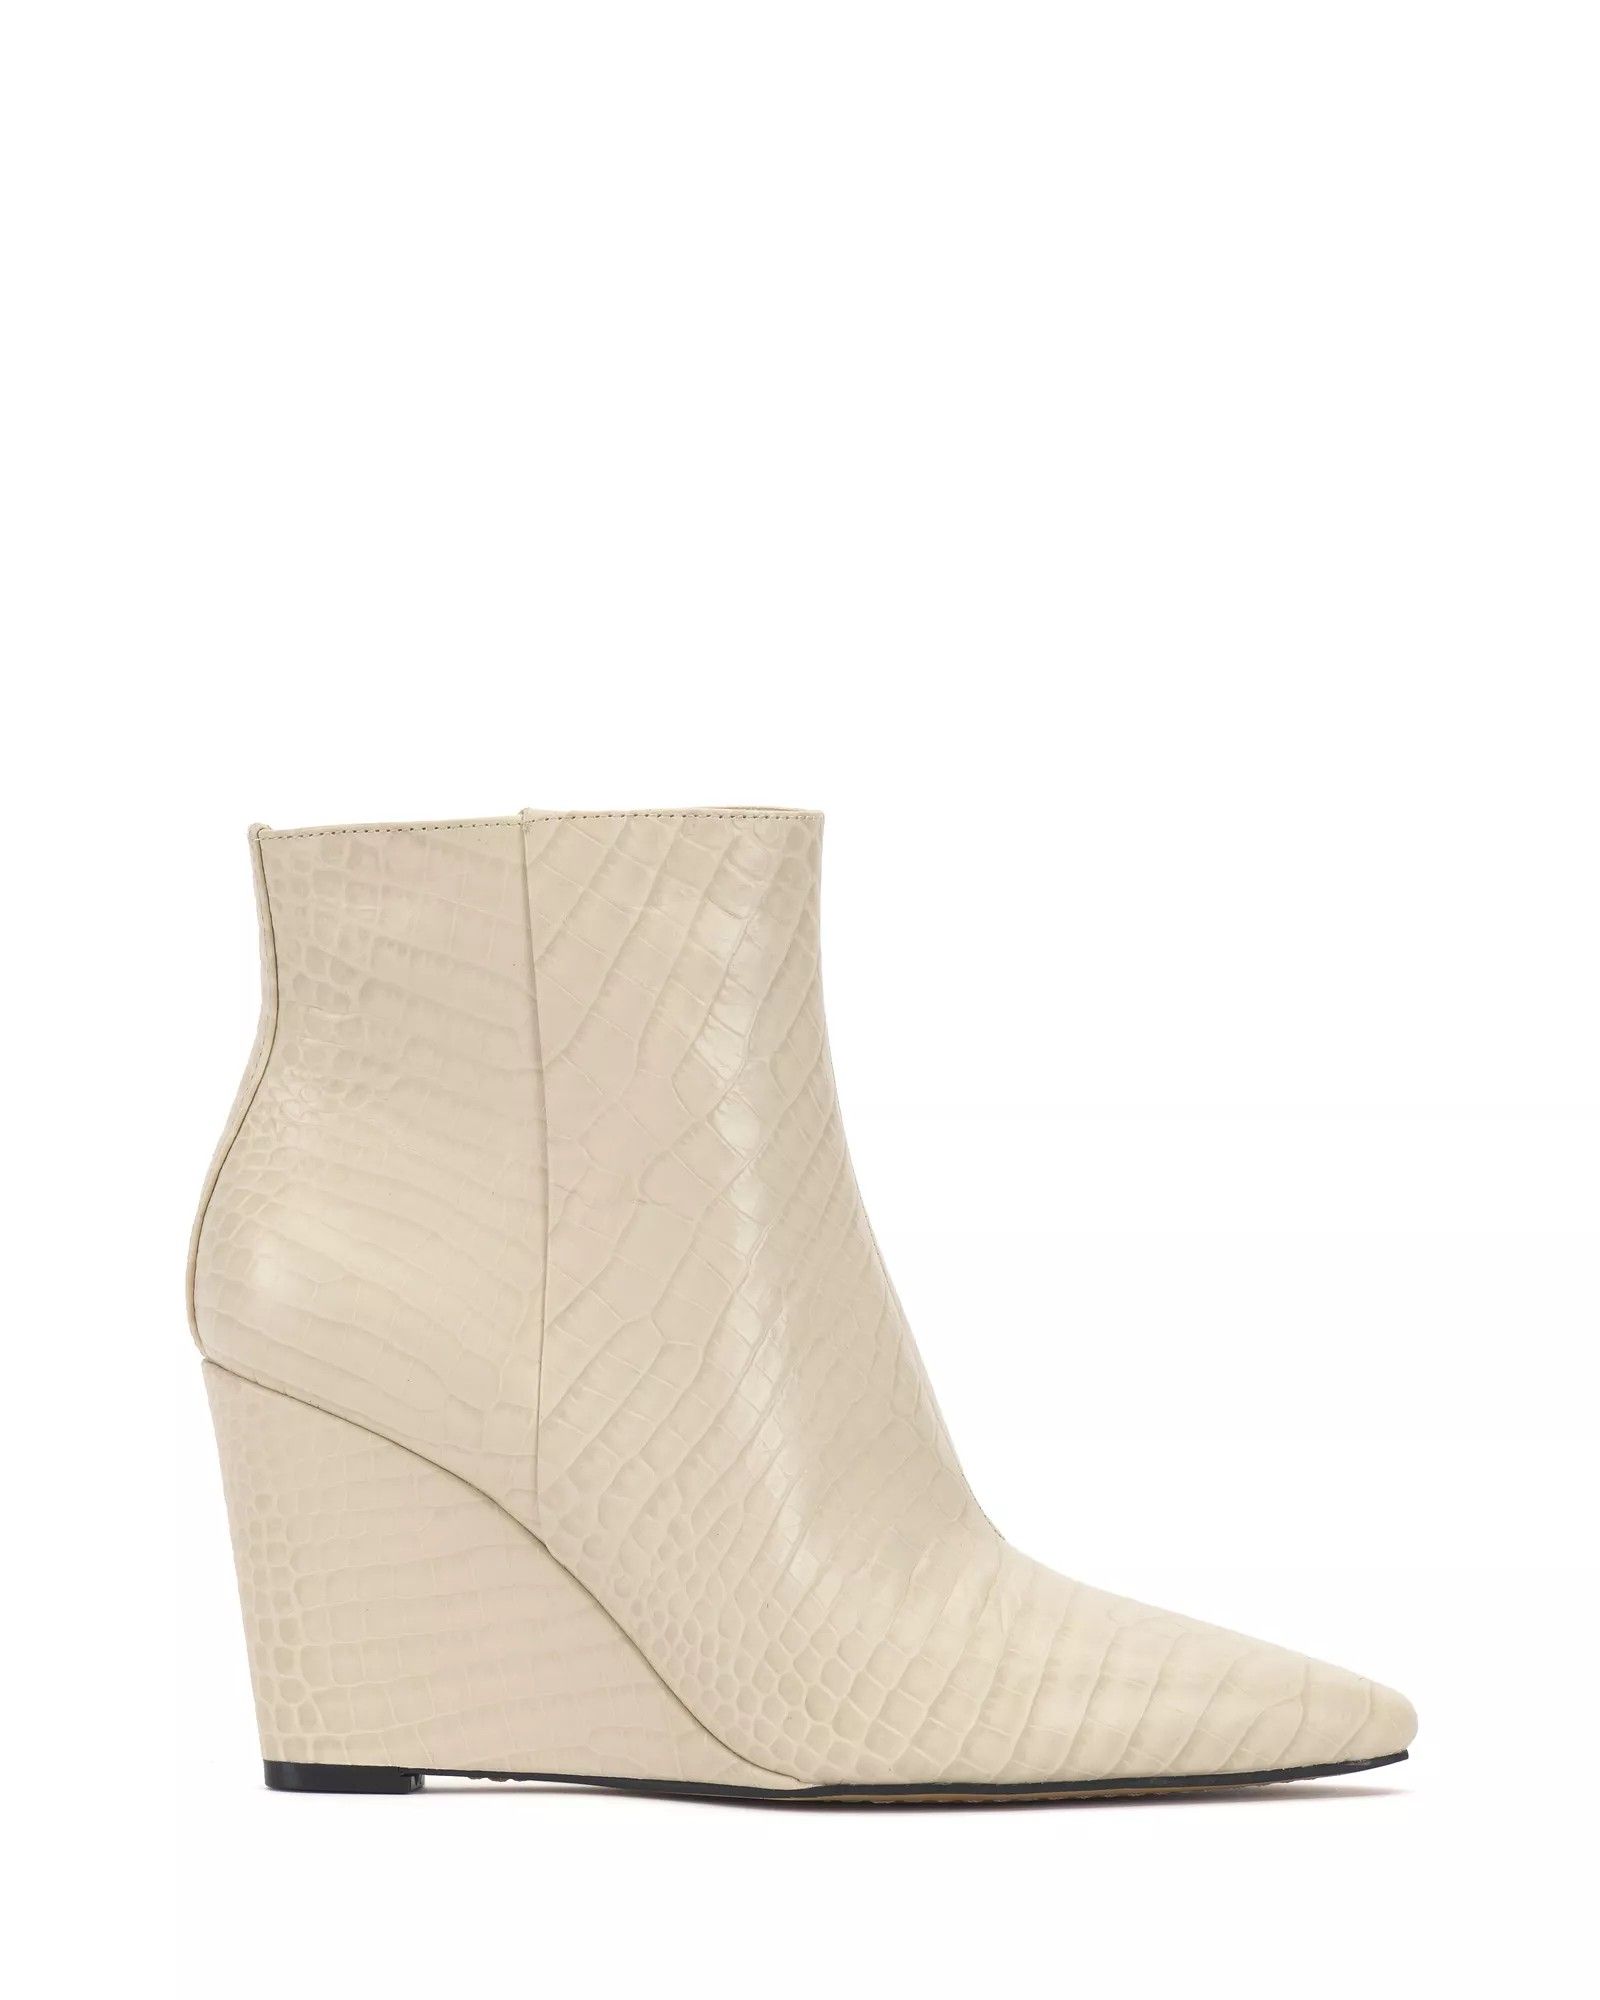 Vince Camuto Teeray Wedge Bootie | Vince Camuto